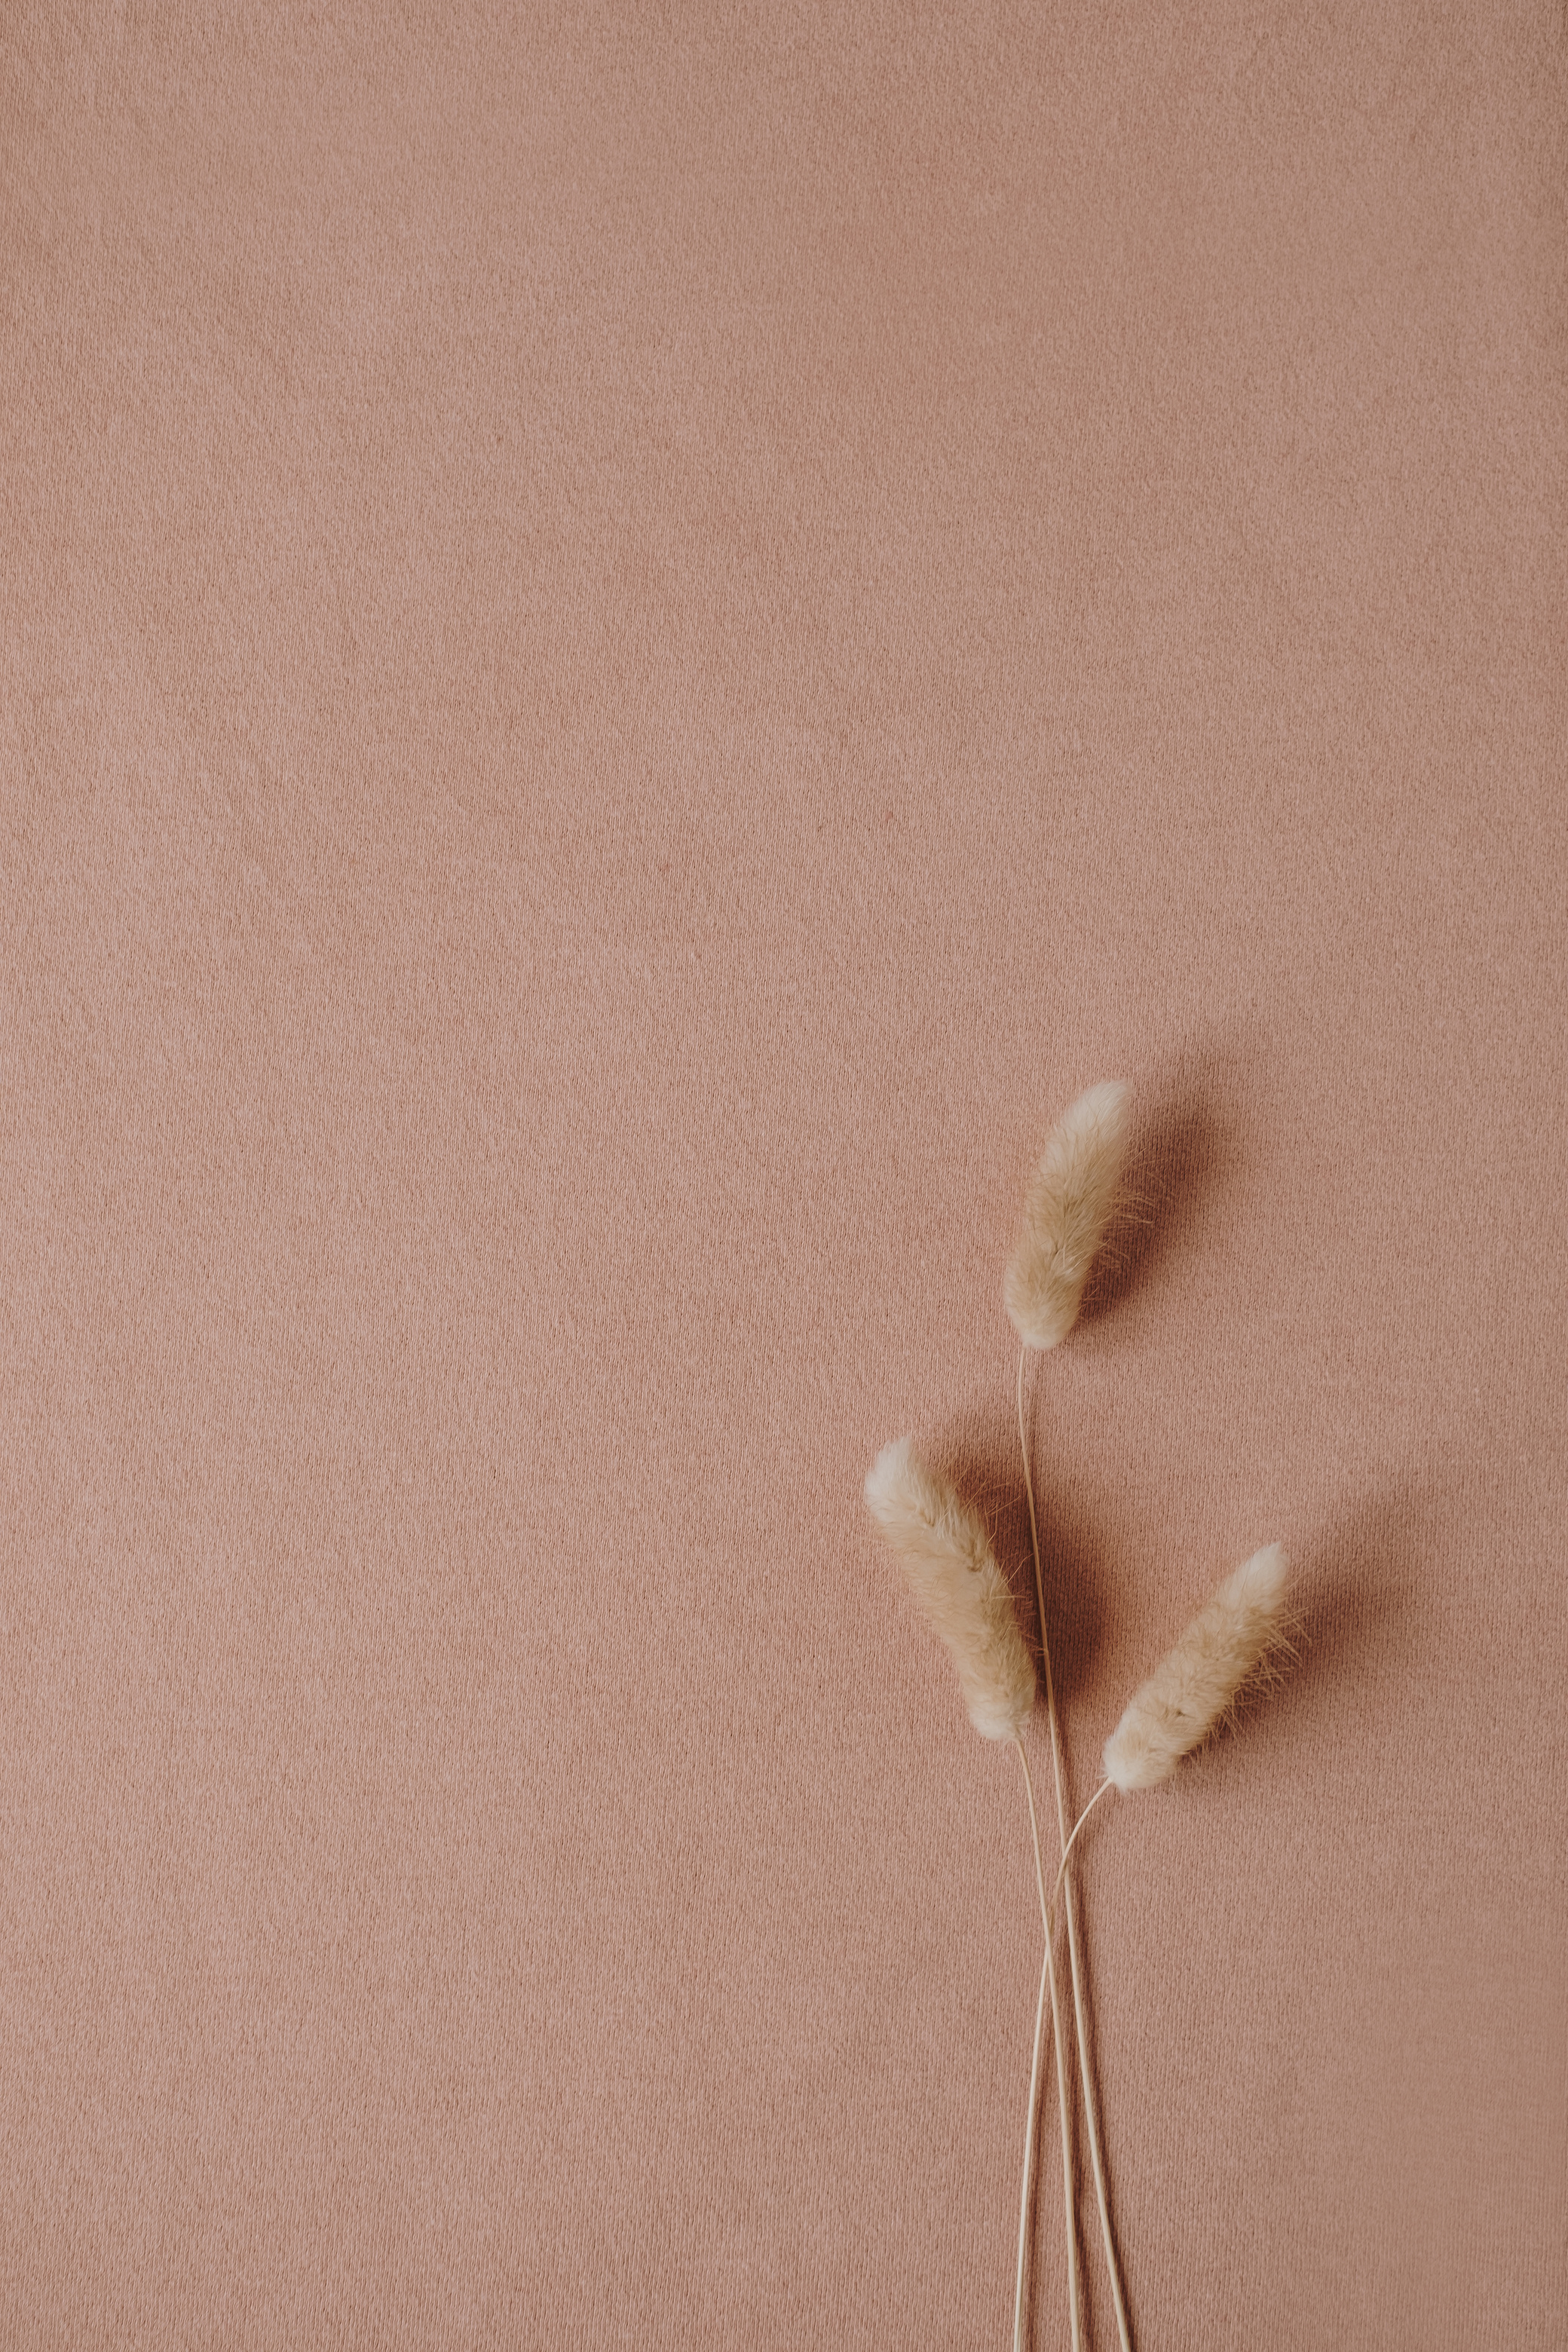 Dried Bunny Tail Grass on Neutral Background 